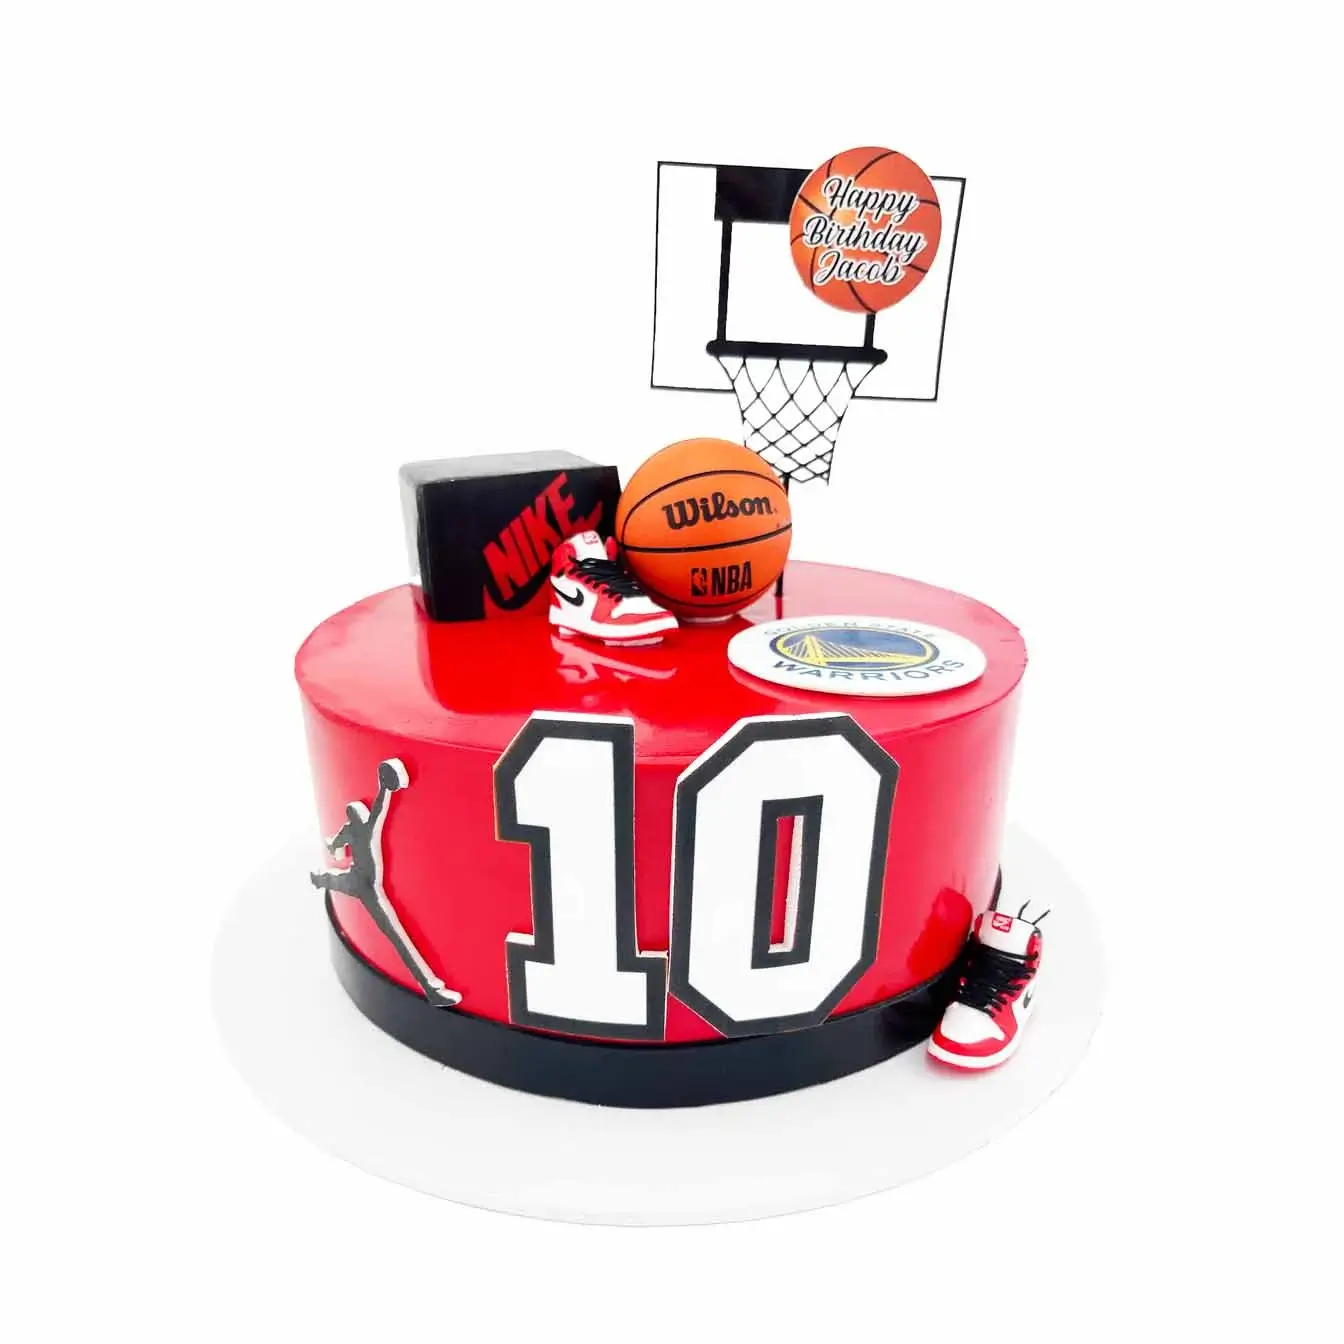 NBA Hoops Slam Dunk Cake - A basketball-themed cake with a hoop topper, basketball, Nike Air Jordan shoe, Nike shoe box, and custom age, a winning centerpiece for sports enthusiasts and celebrations filled with athletic flair.